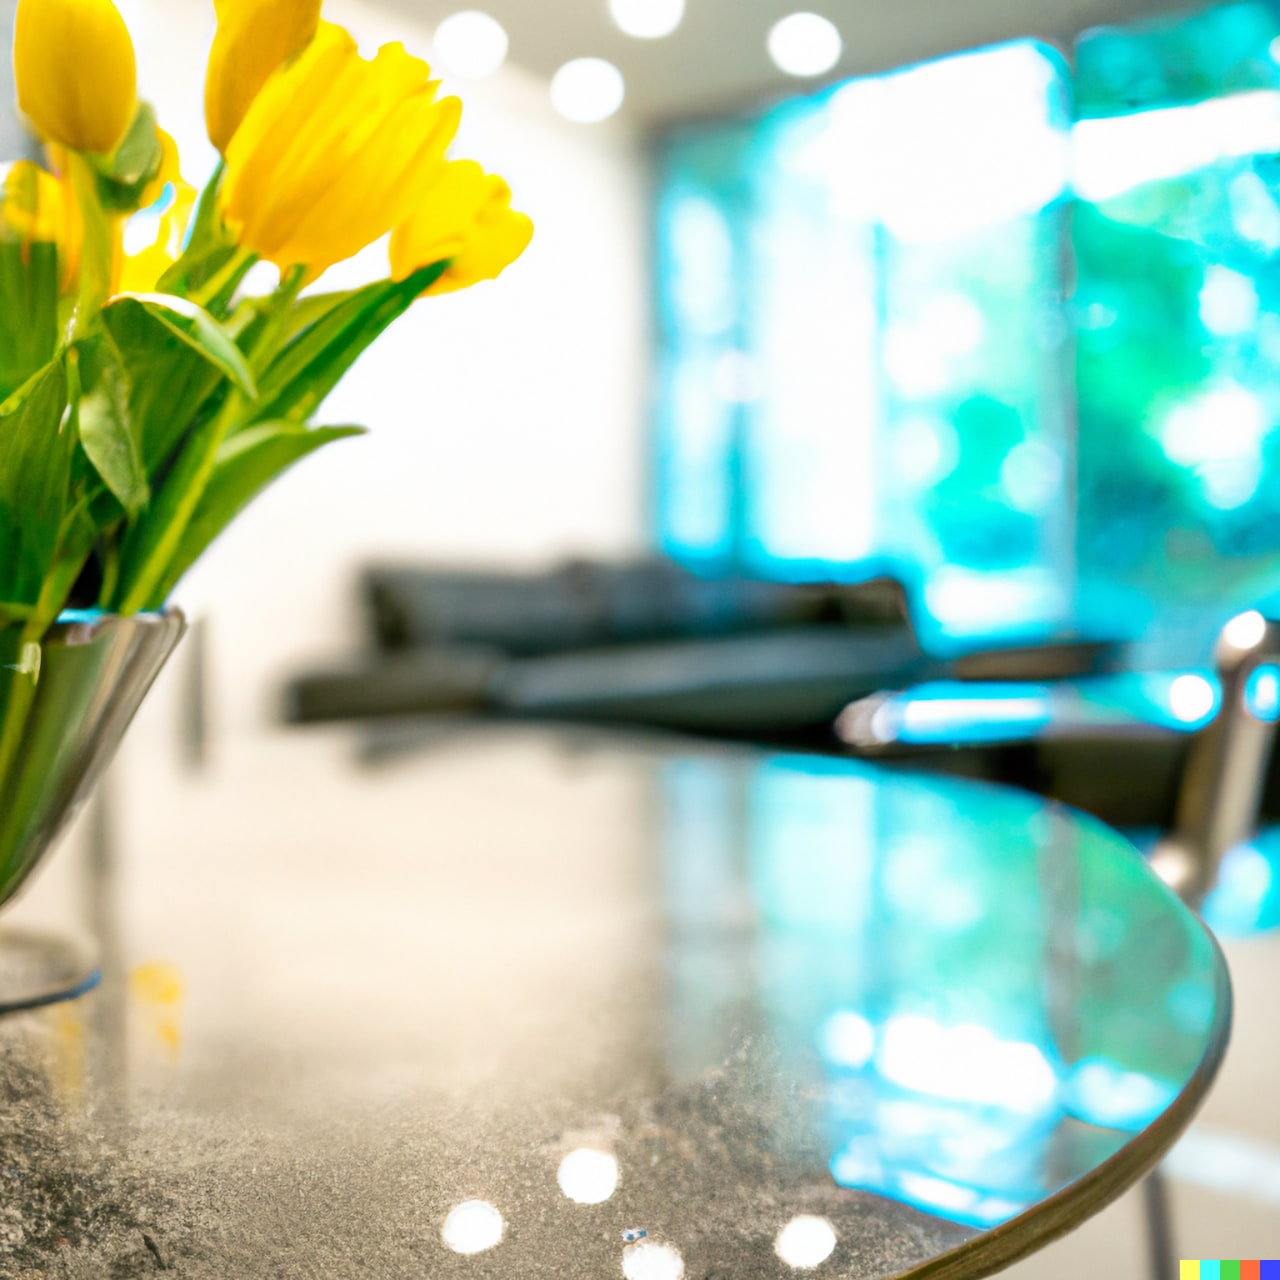 DALL·E 2022-08-11 09.40.10 - A vase of yellow tulips on a chrome coloured coffee table in a mid-century-modern living room with marble flooring and a vast garden visible through s